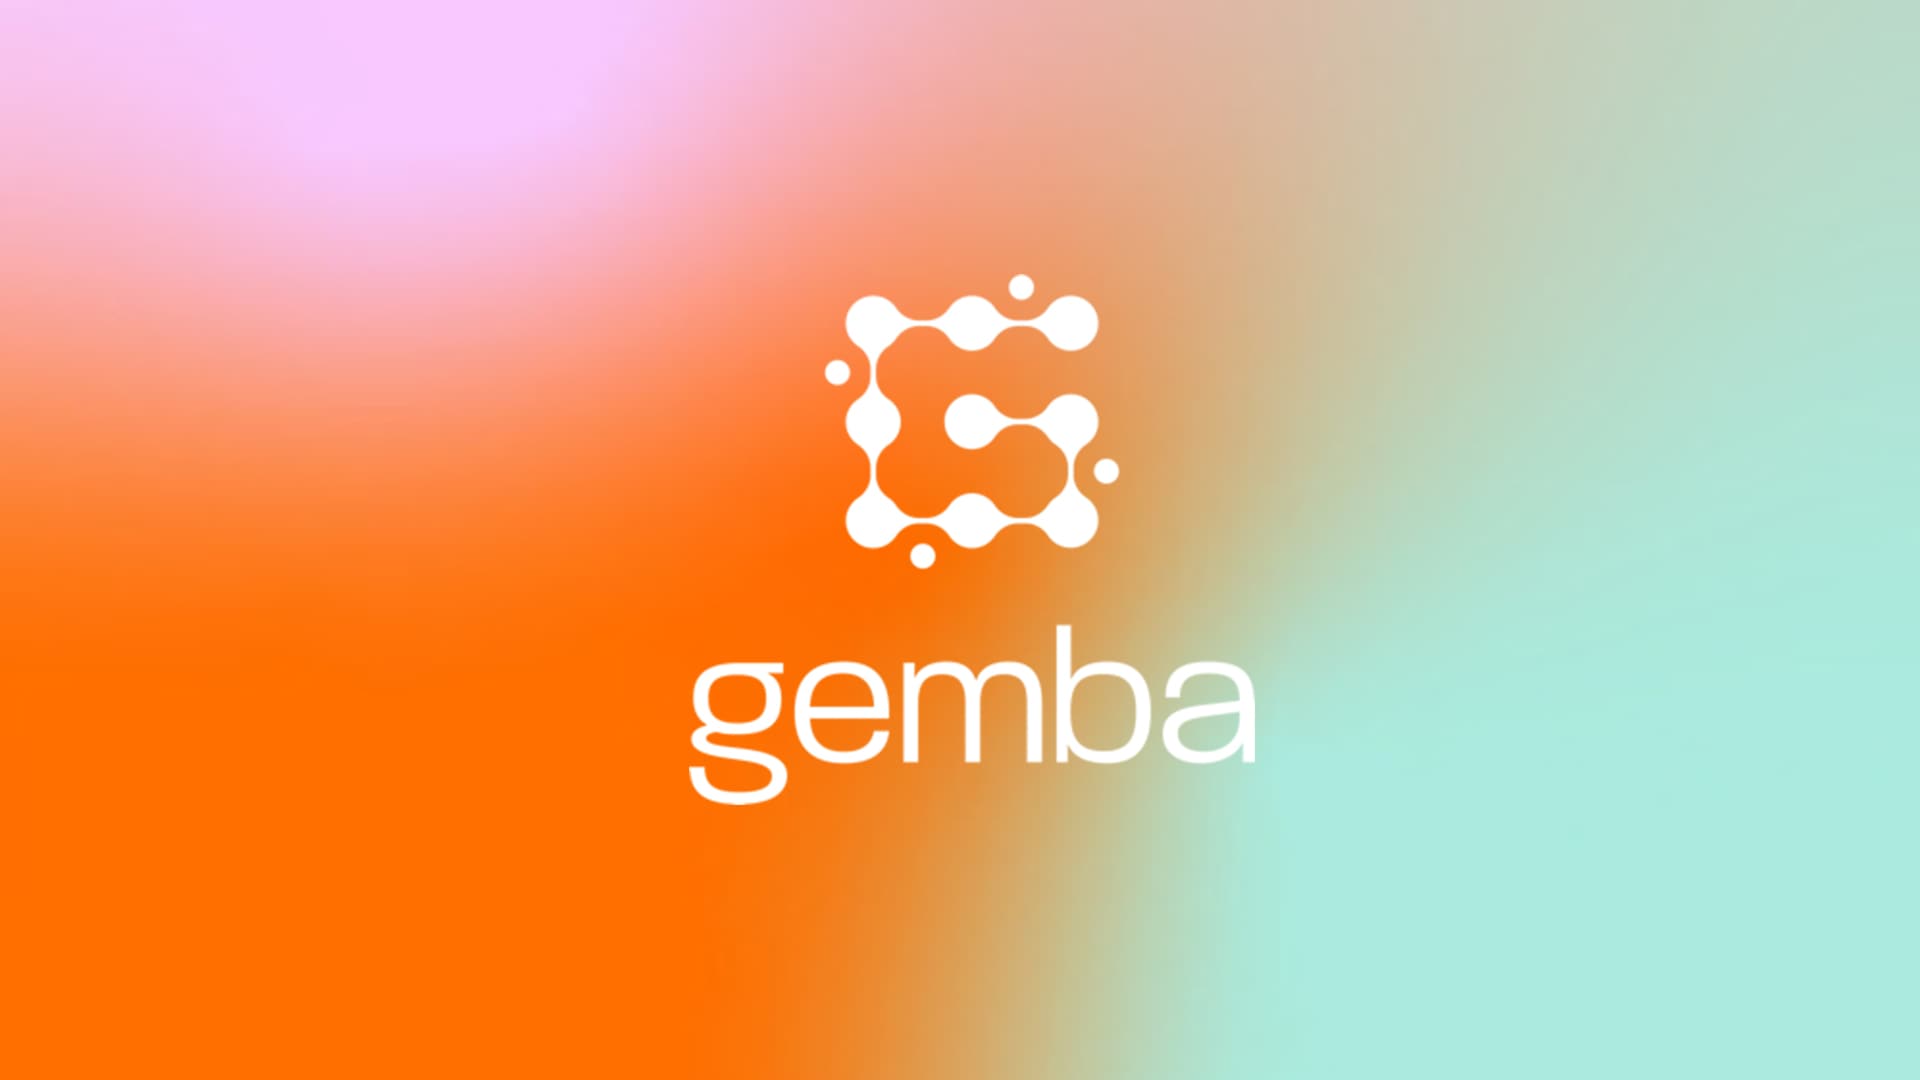 What does Gemba mean